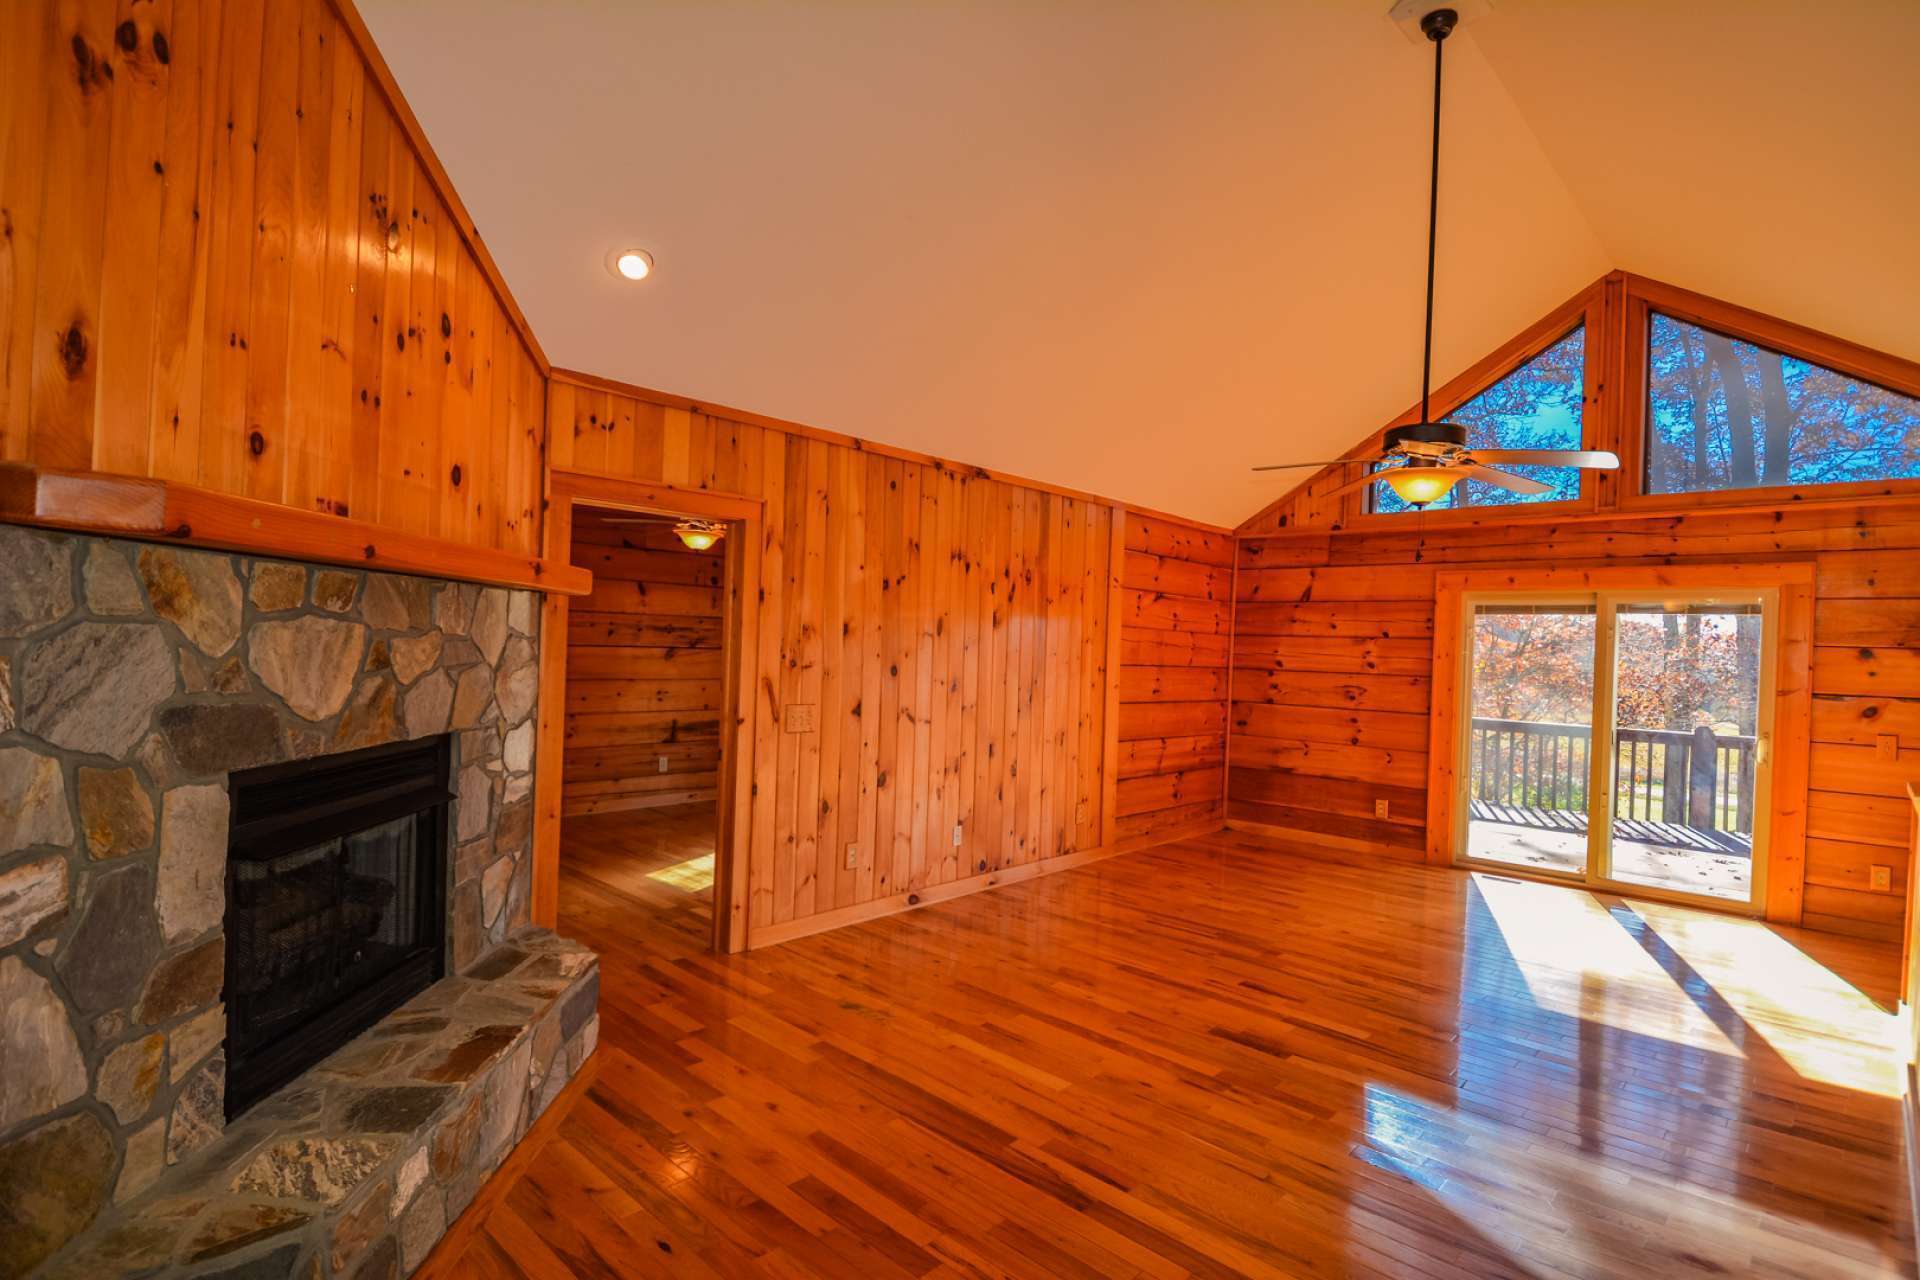 The vaulted great room's focal points are the stone gas log fireplace and a wall of windows to take in the lush mountain setting. Gleaming wood floors compliment the vaulted ceiling and wood walls.